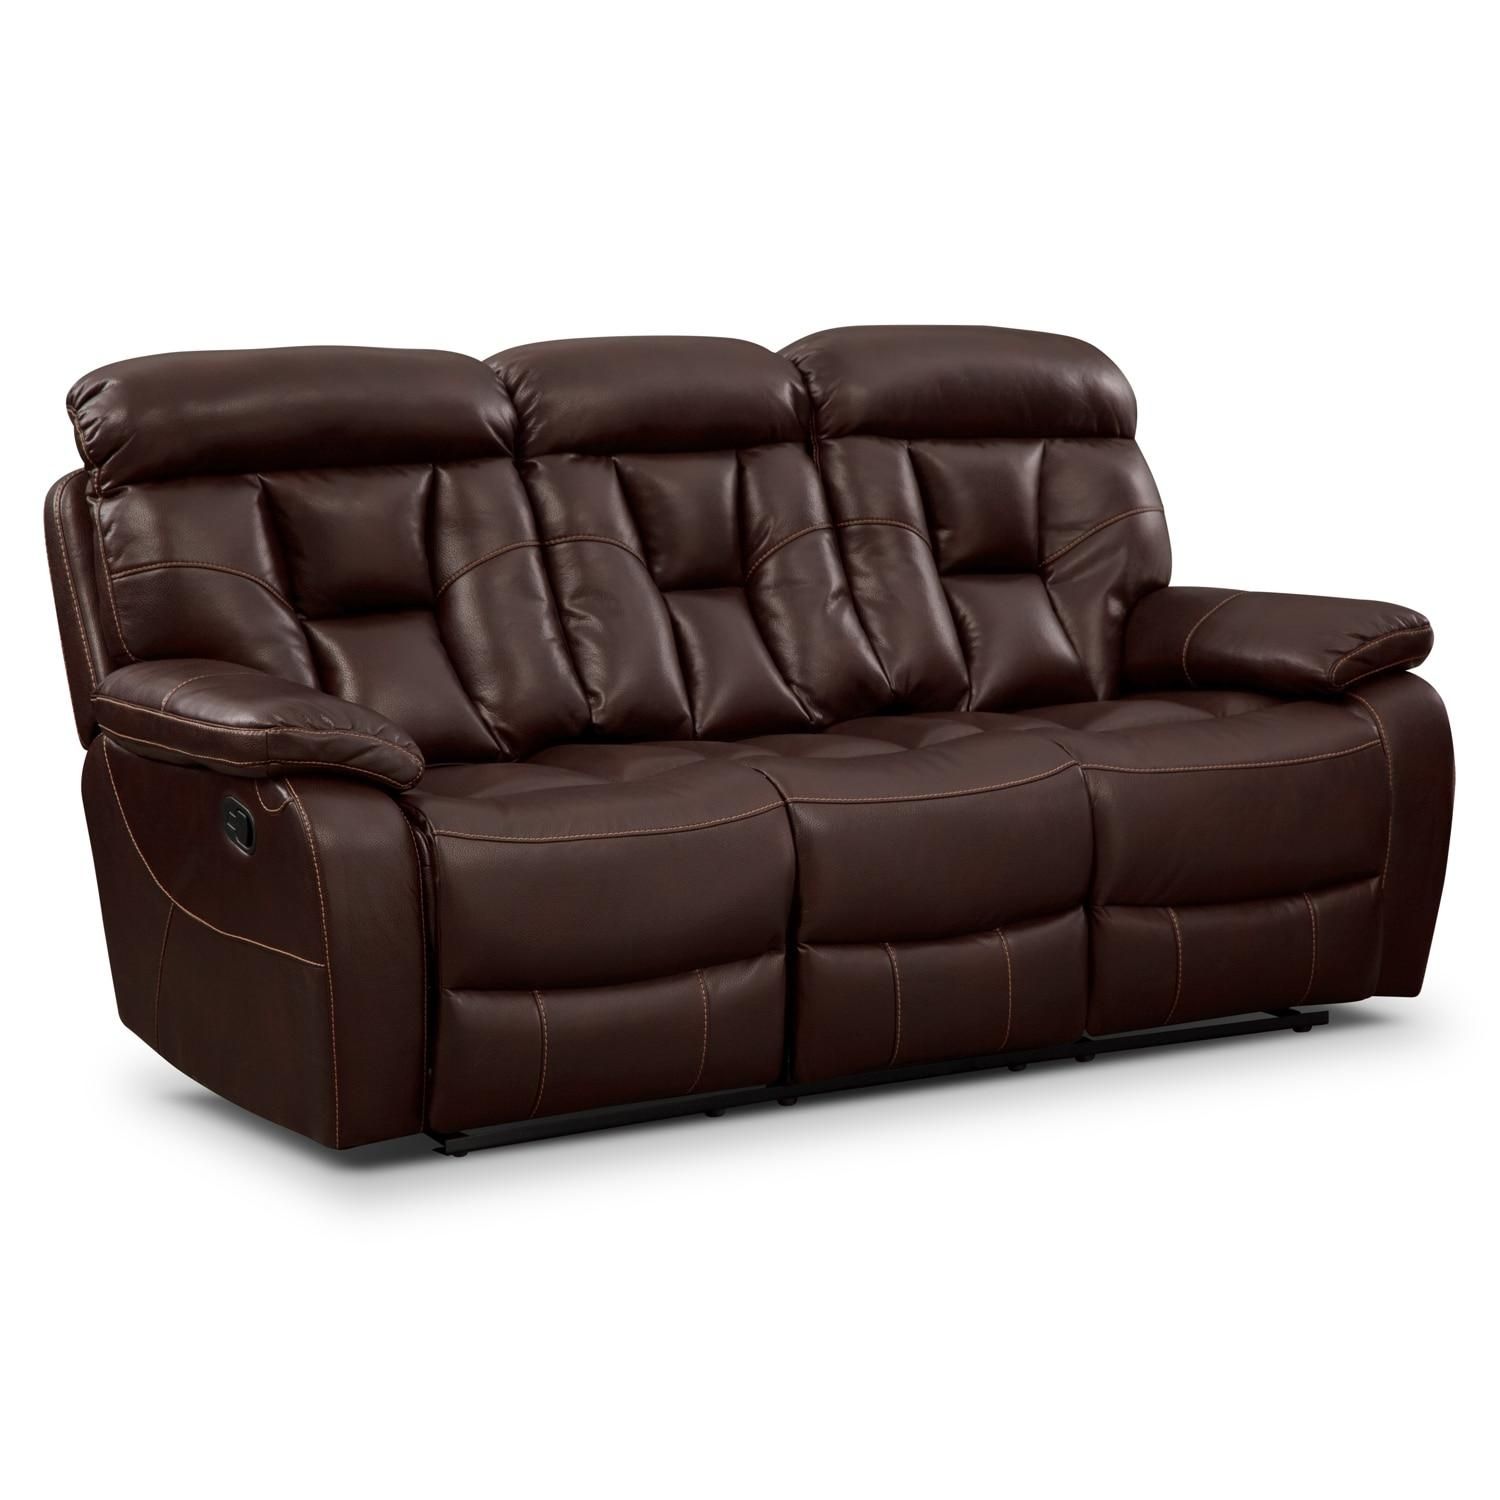 Sofas & Couches | Living Room Seating | Value City Furniture In Sofa Chair Recliner (View 18 of 20)